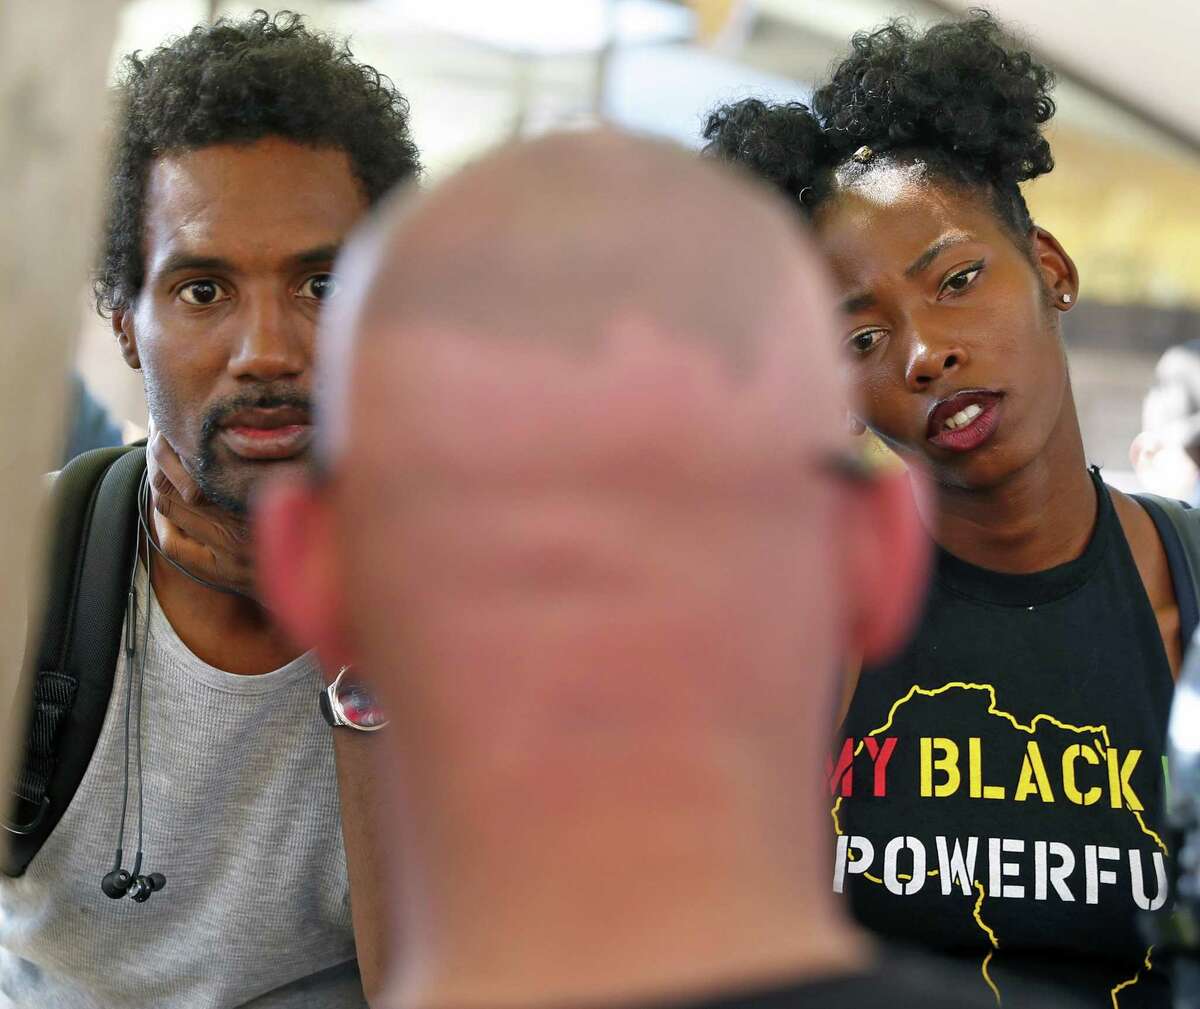 Jarrett Wright, left, and a fellow Cal student, right, who preferred to not be identified, listen to Patriot Prayer's Kyle Broussard, center, explains his stance on the Black Lives Matter movement at Sproul Plaza on the University of California at Berkeley campus on Wednesday, September 27, 2017.